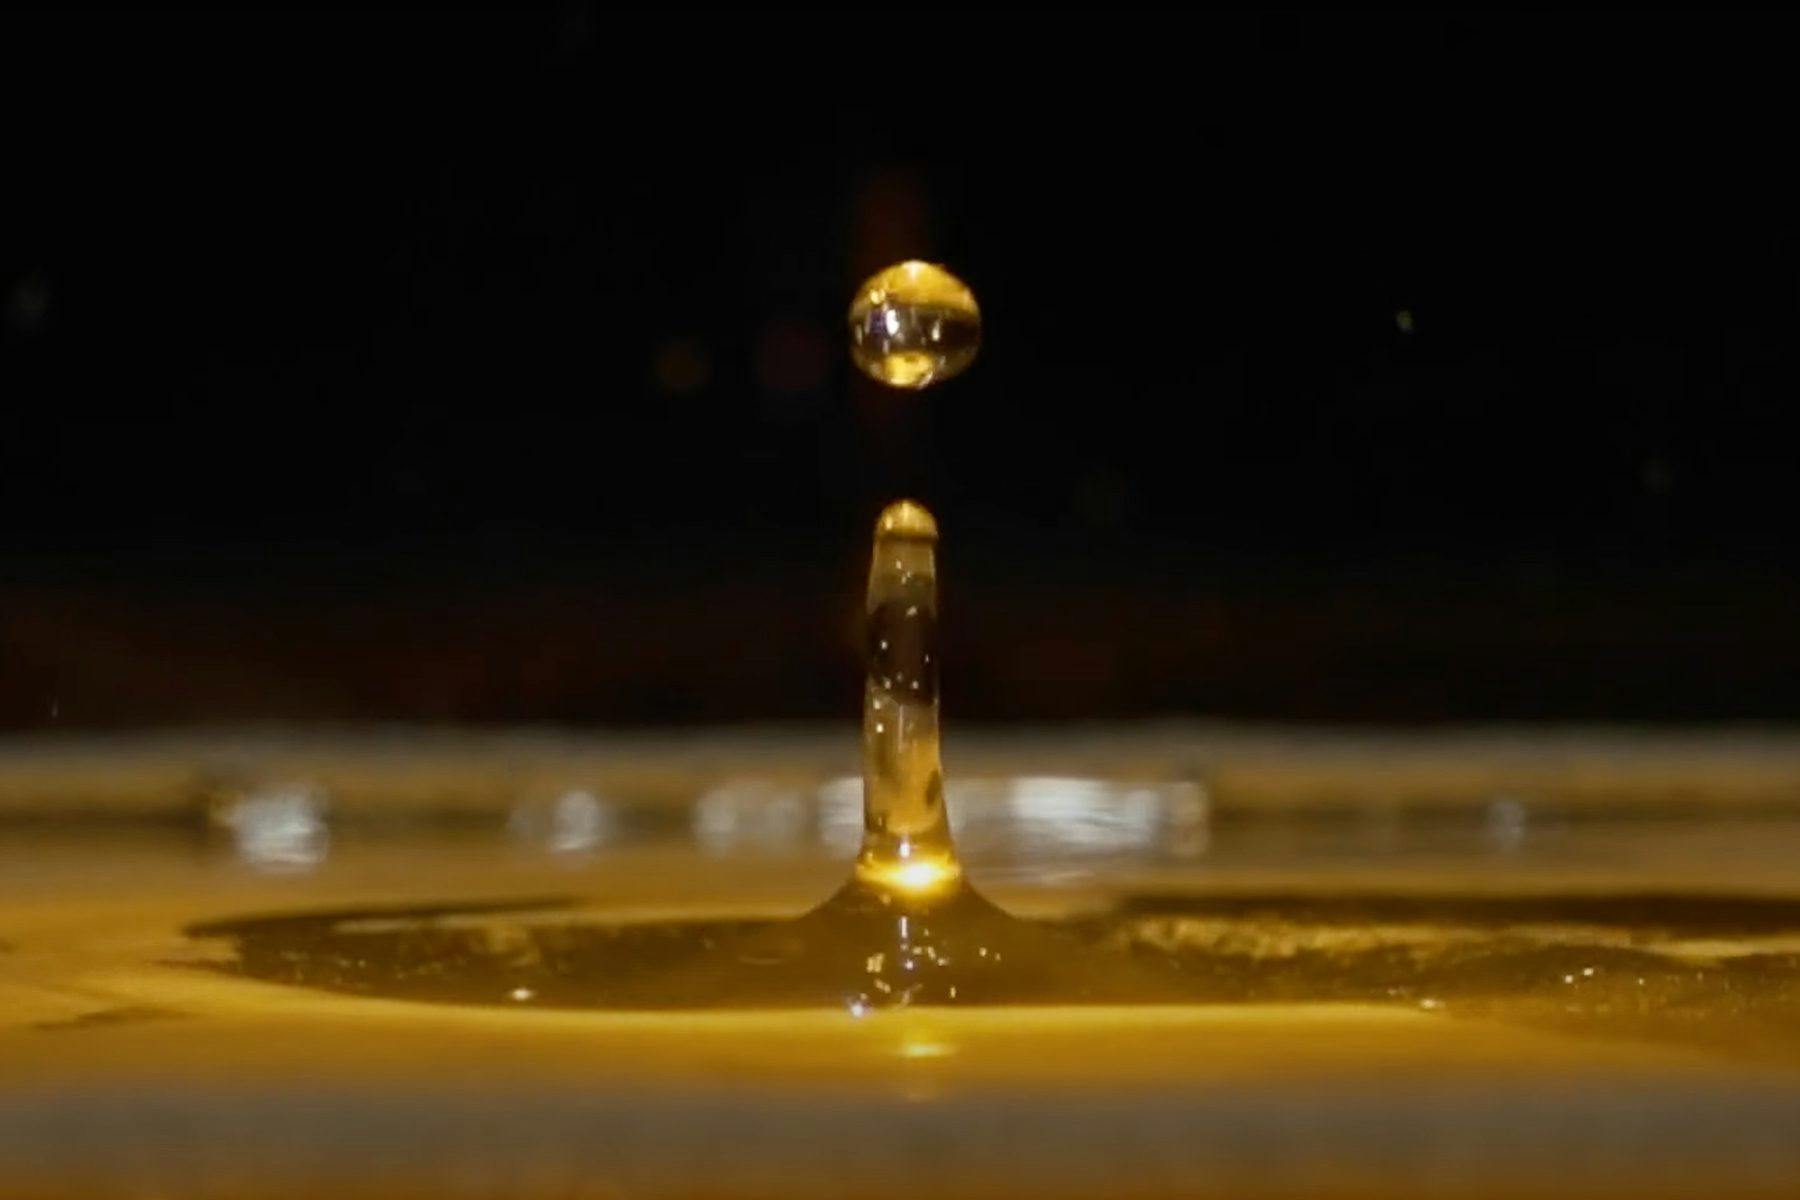 A drop of beer jumping into the air after being poured